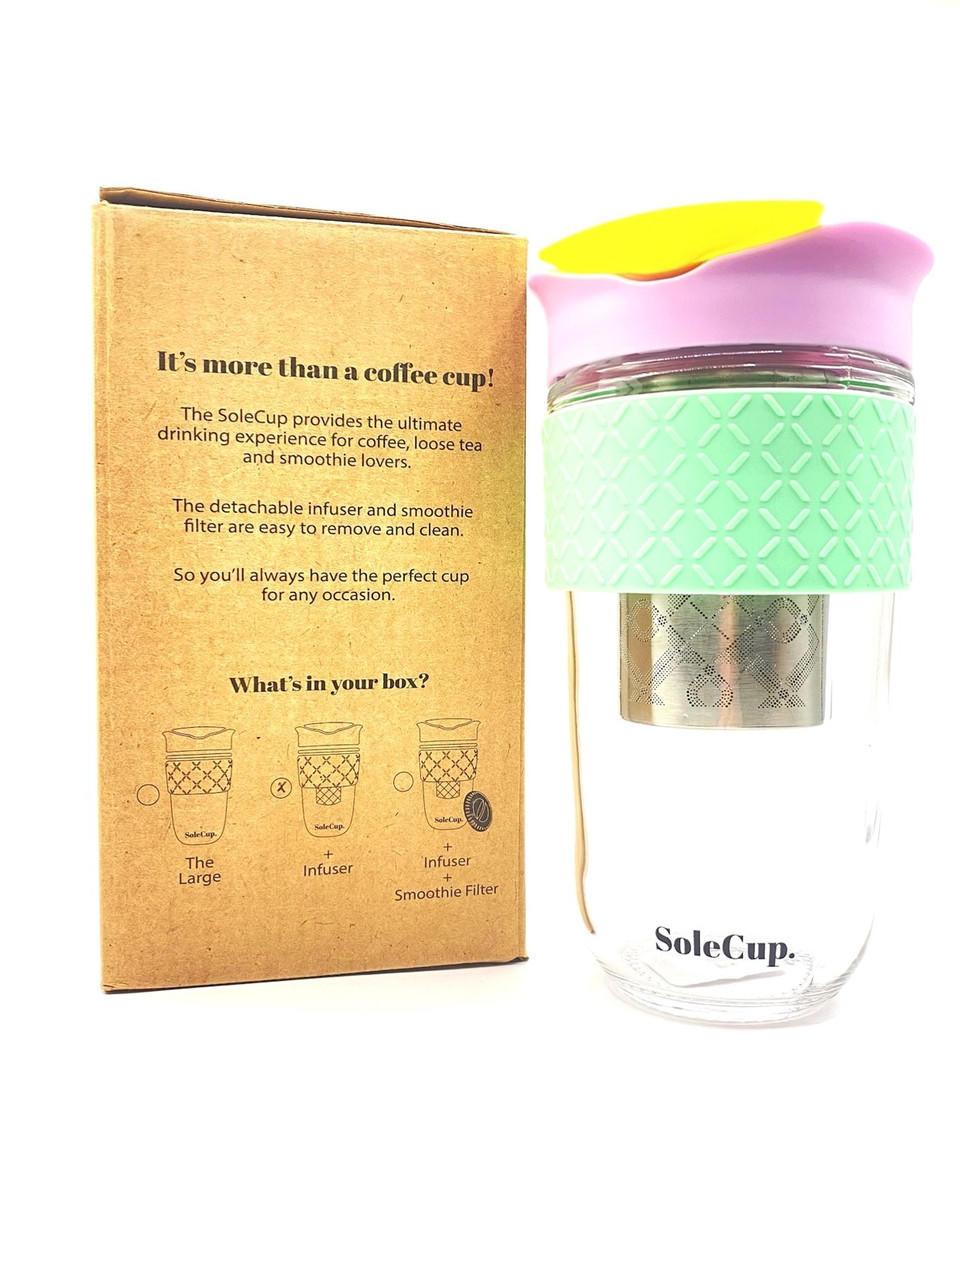 The SoleCup - Reusable Coffee Cup - Glass Travel Mug